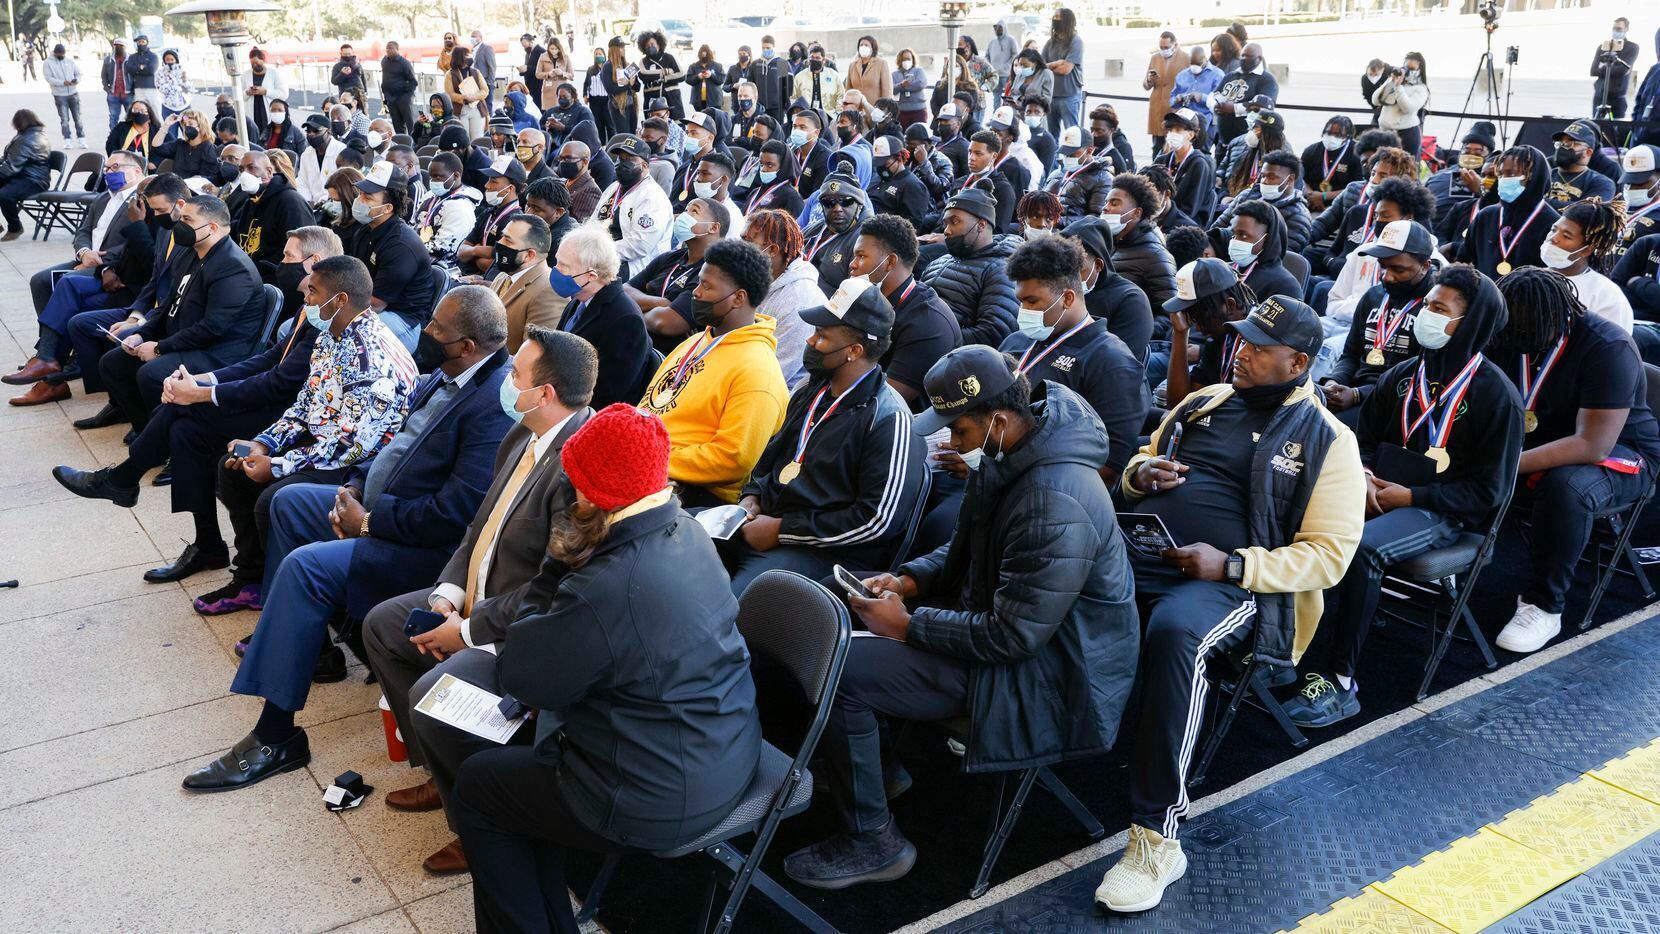 The South Oak Cliff football team sit with members of the Dallas City Council during a ceremony recognizing South Oak Cliff’s UIL Class 5A Division II football state championship at Dallas City Hall in Dallas, on Wednesday, Jan. 12, 2022.